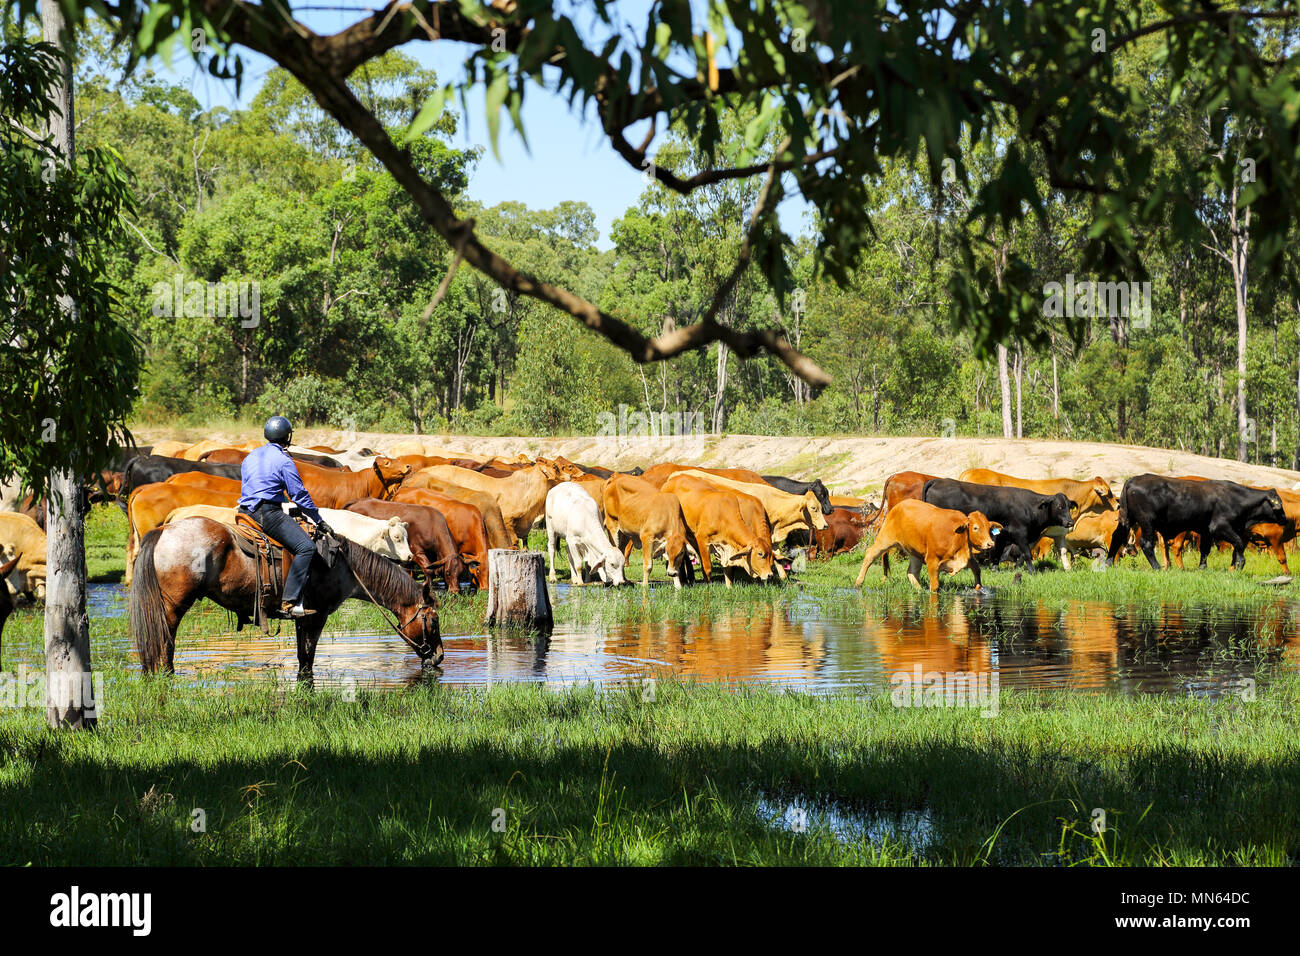 A cowgirl on horseback watches over a mixed mob of cattle drinking on a farm dam. Stock Photo